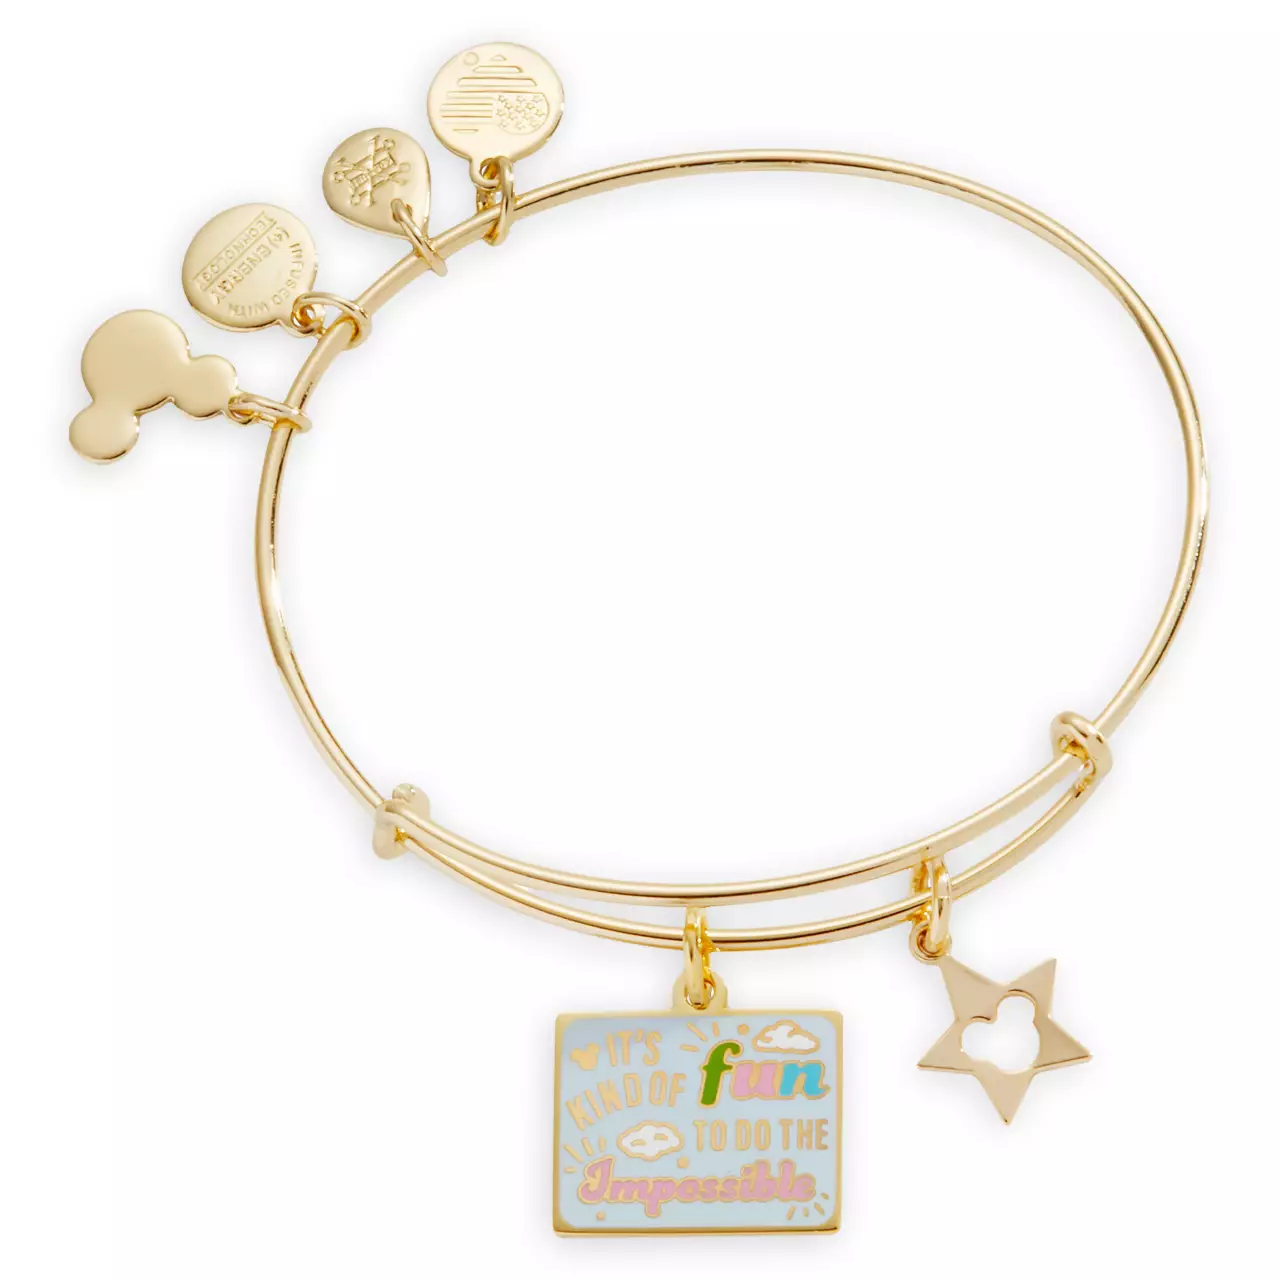 Walt Disney ”It’s Kind of Fun to Do the Impossible” Bangle by Alex and Ani